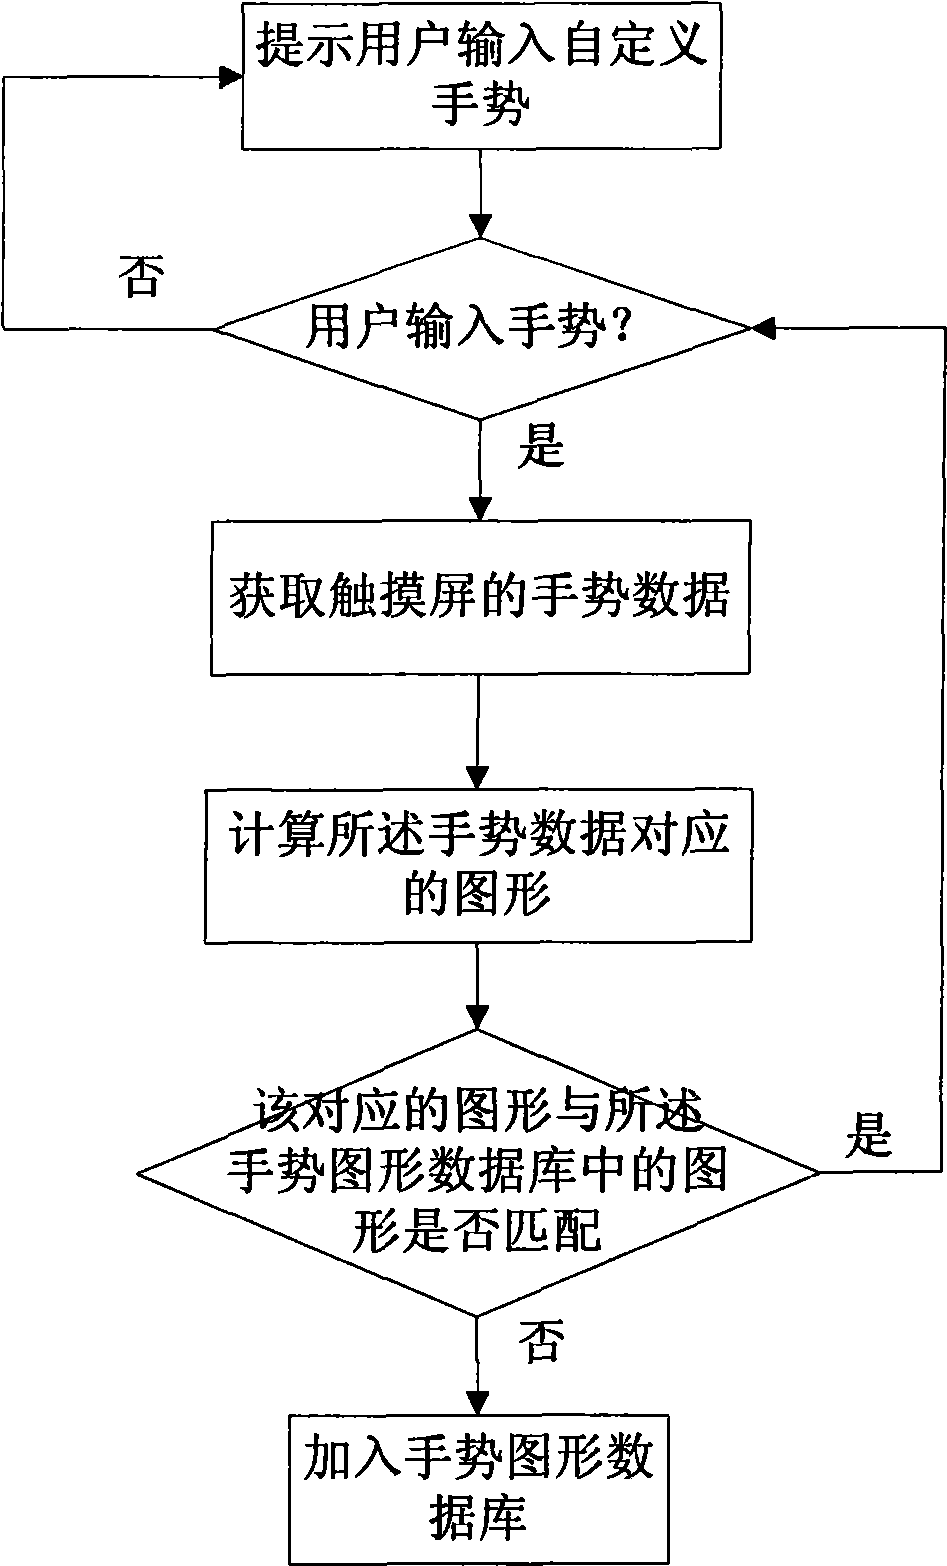 Identification and operation method of touch screen interface gestures